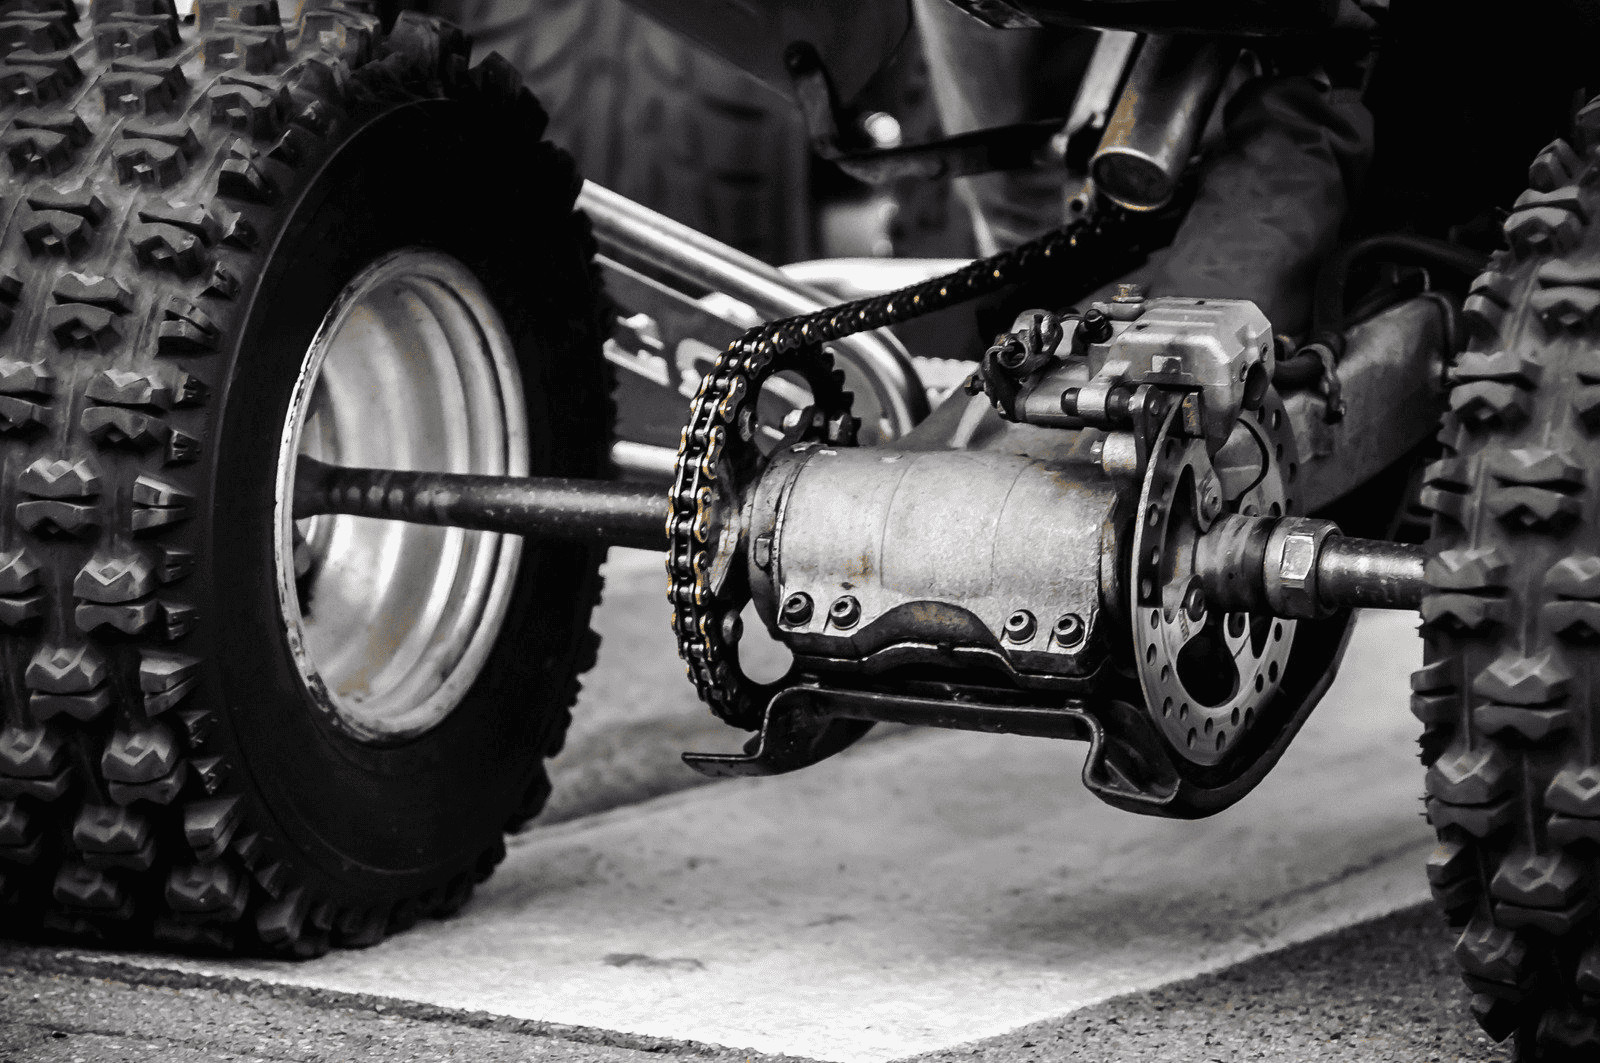 ATV with clutch kit upgrade